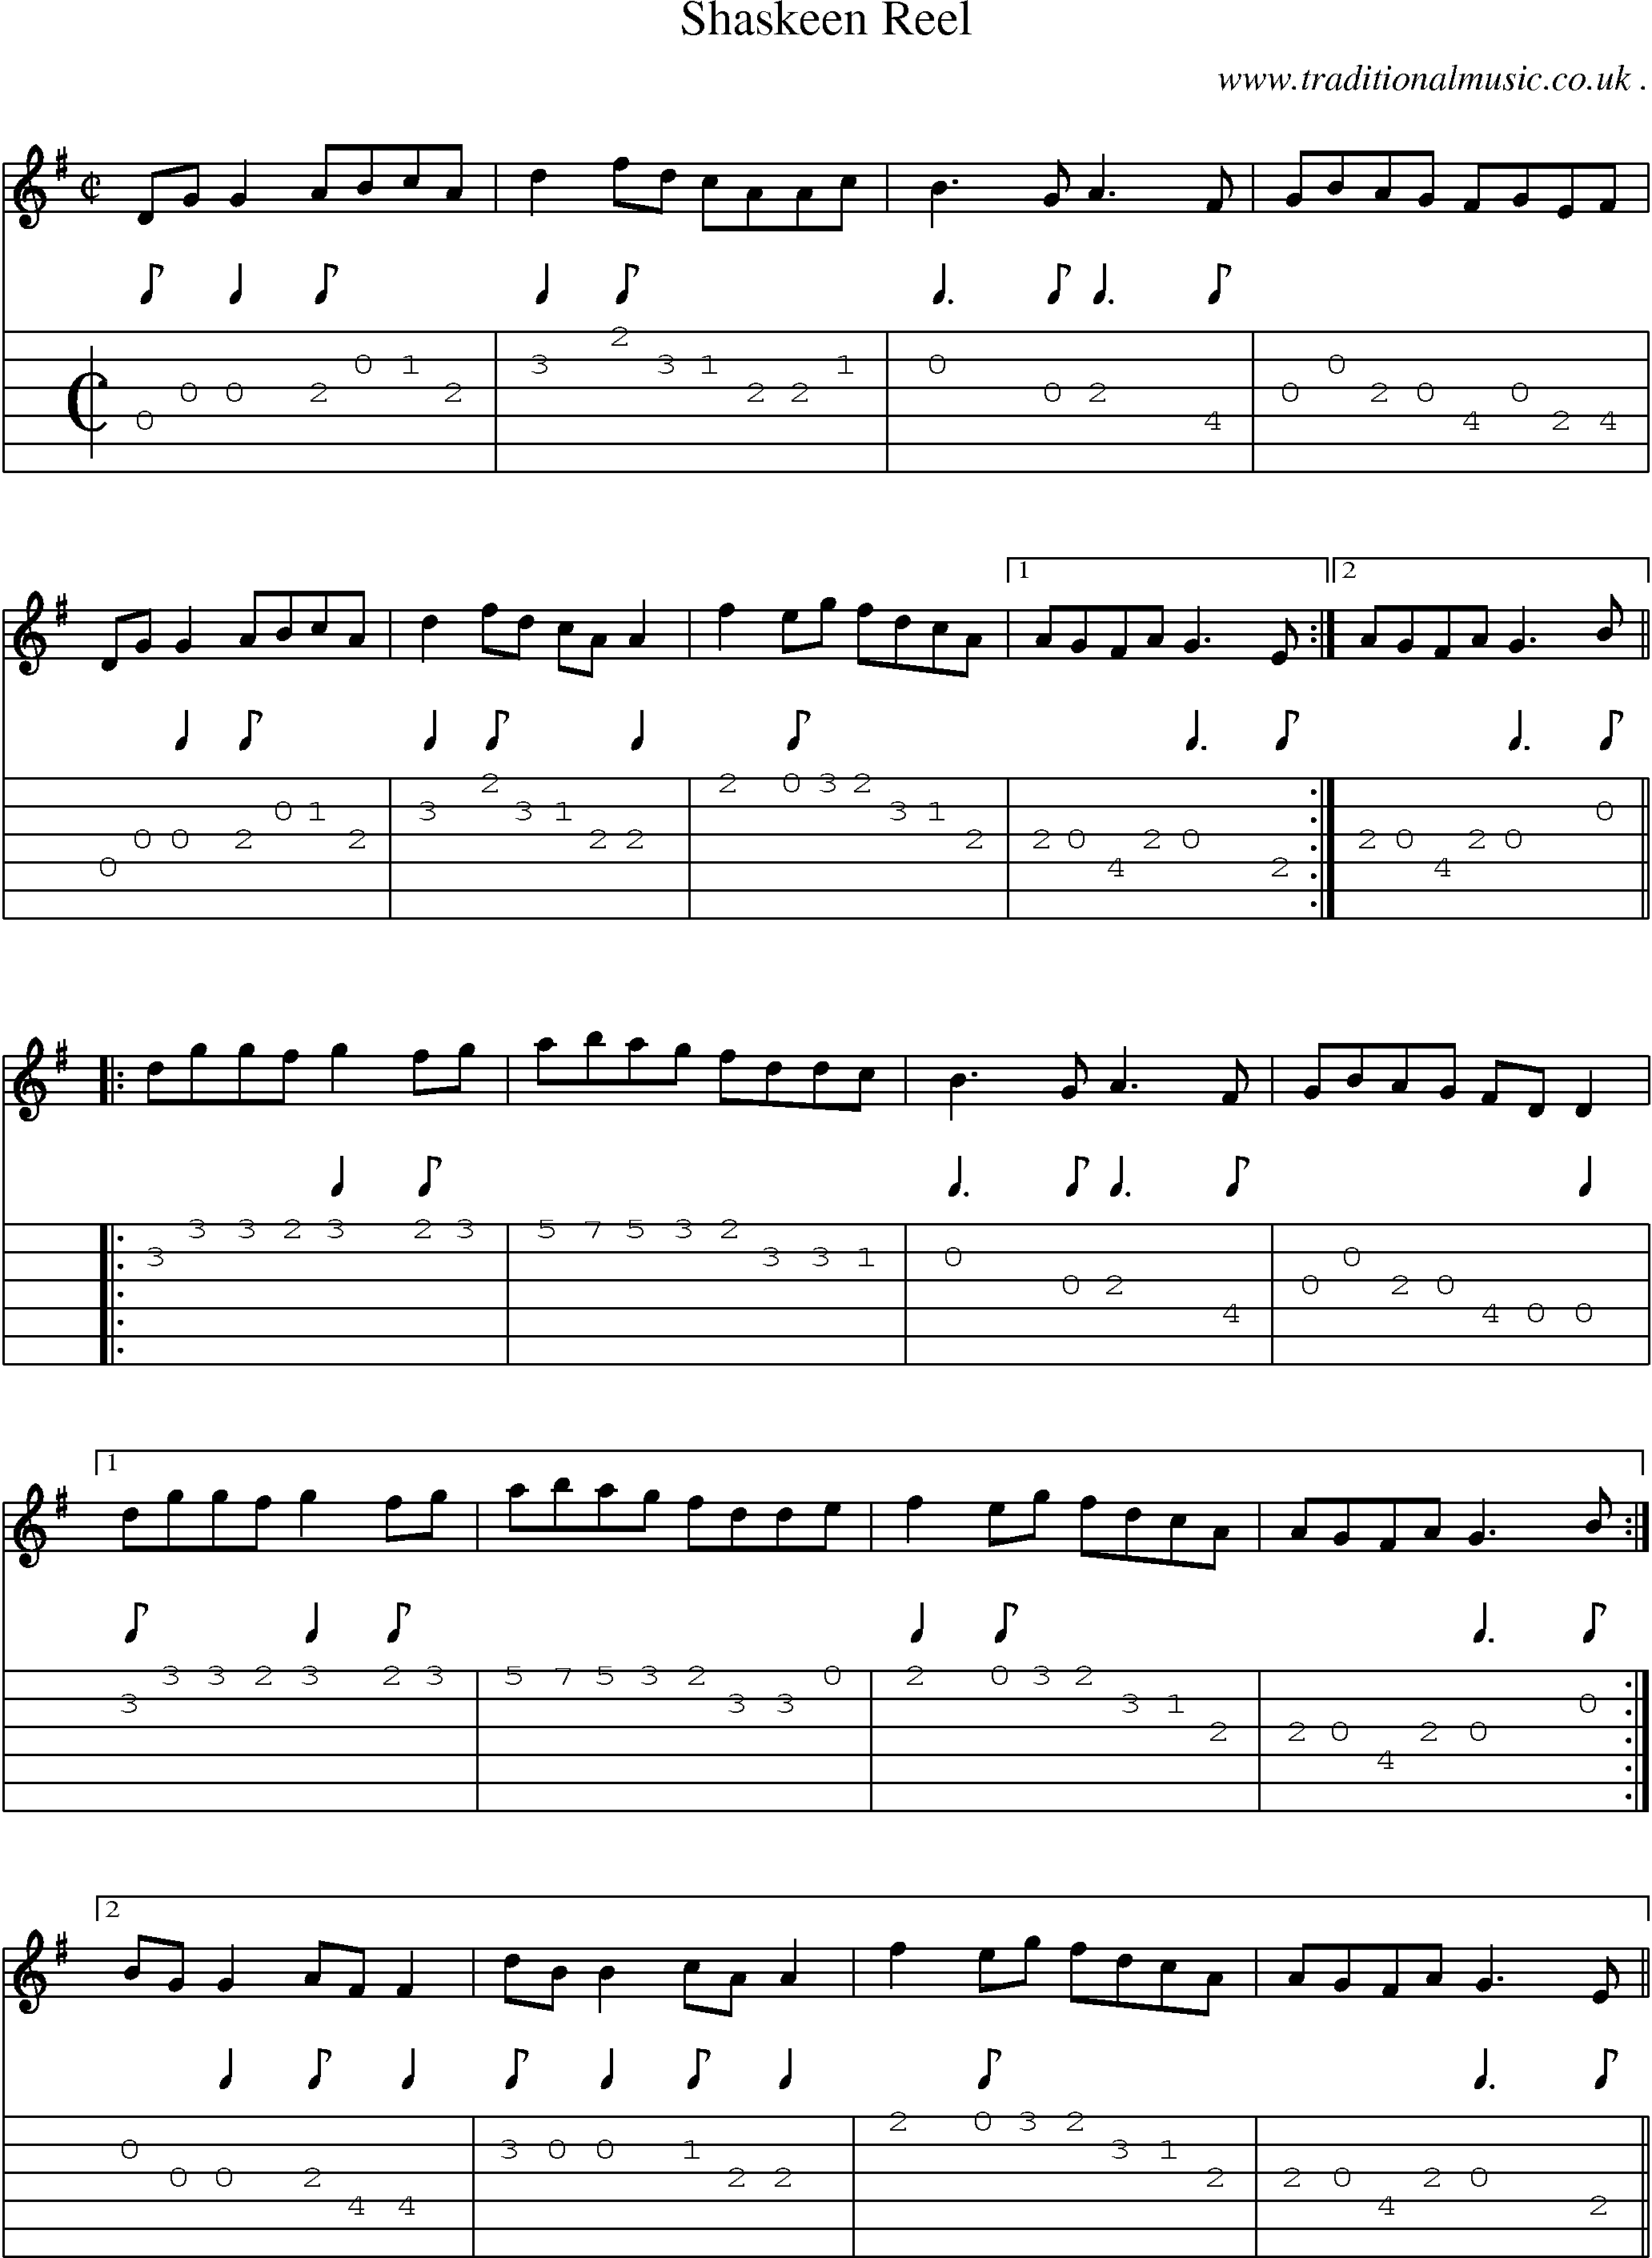 Sheet-Music and Guitar Tabs for Shaskeen Reel